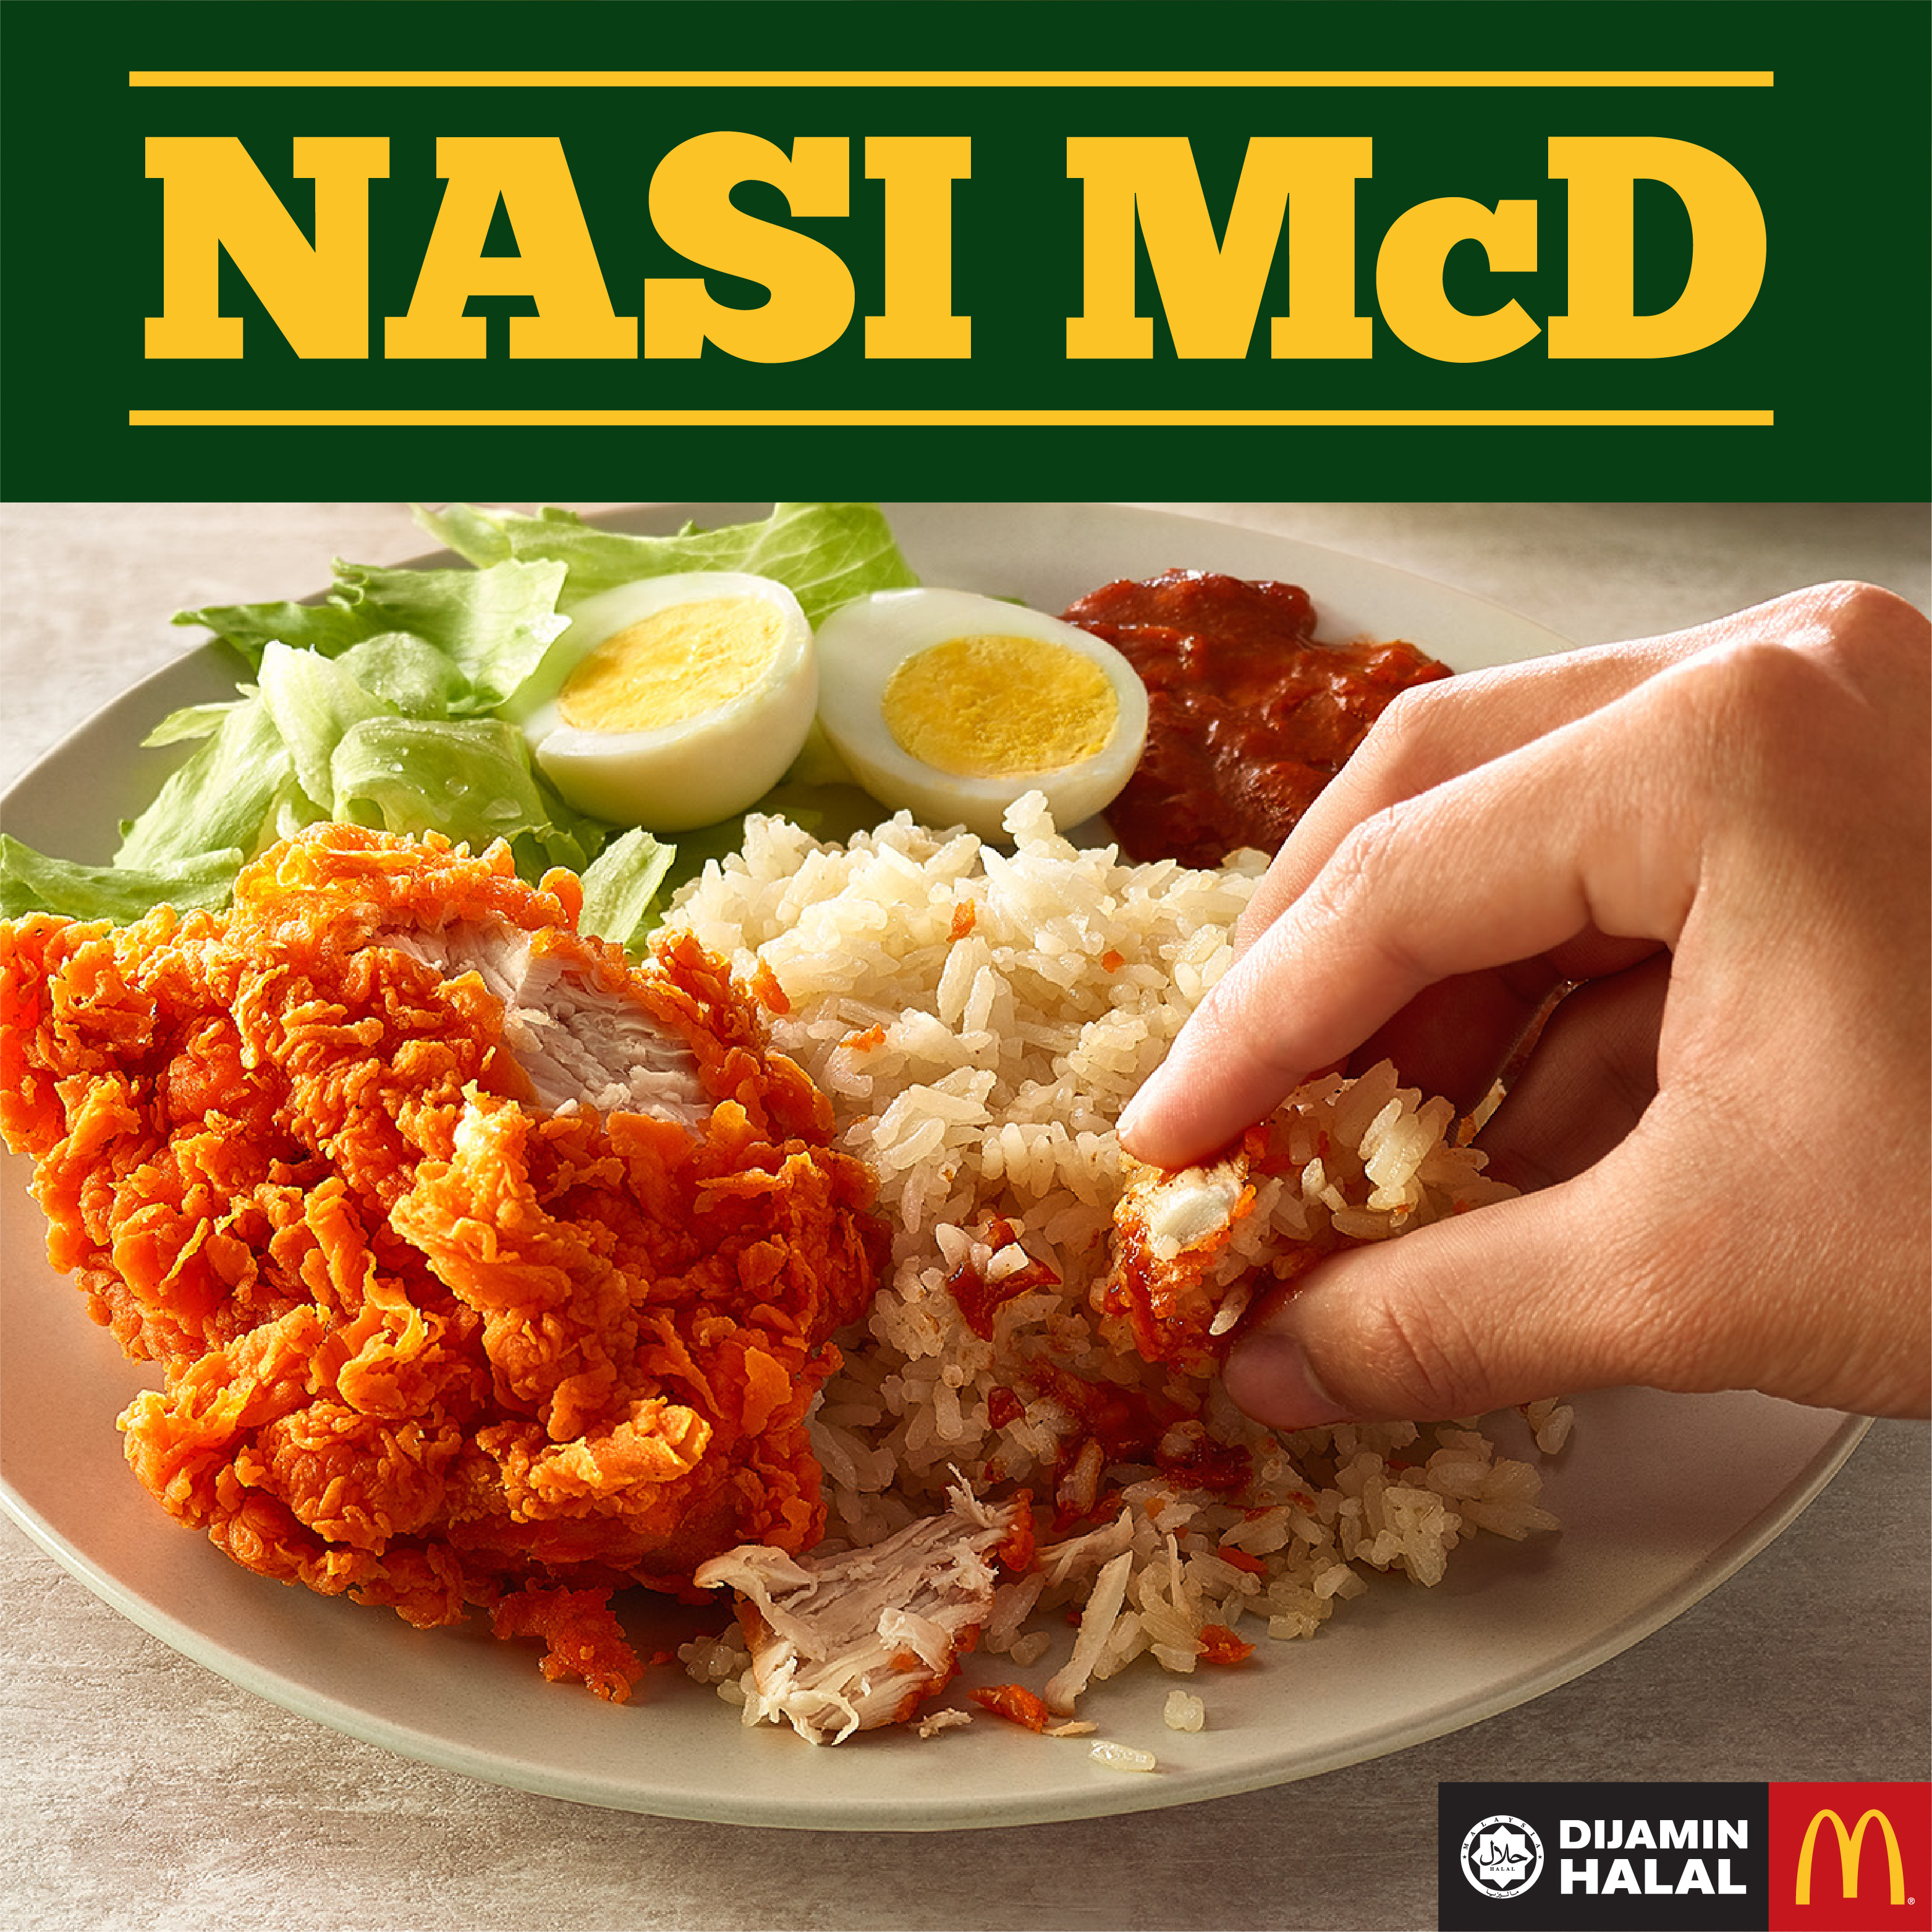 Nasi Lemak Mcd Mcdonald Menu Prices Malaysia 2020 / Mcdonald S Menu Malaysia 2021 Mcdonald S Price List Promotion : Now comes with a series of appetizing combinations that you.